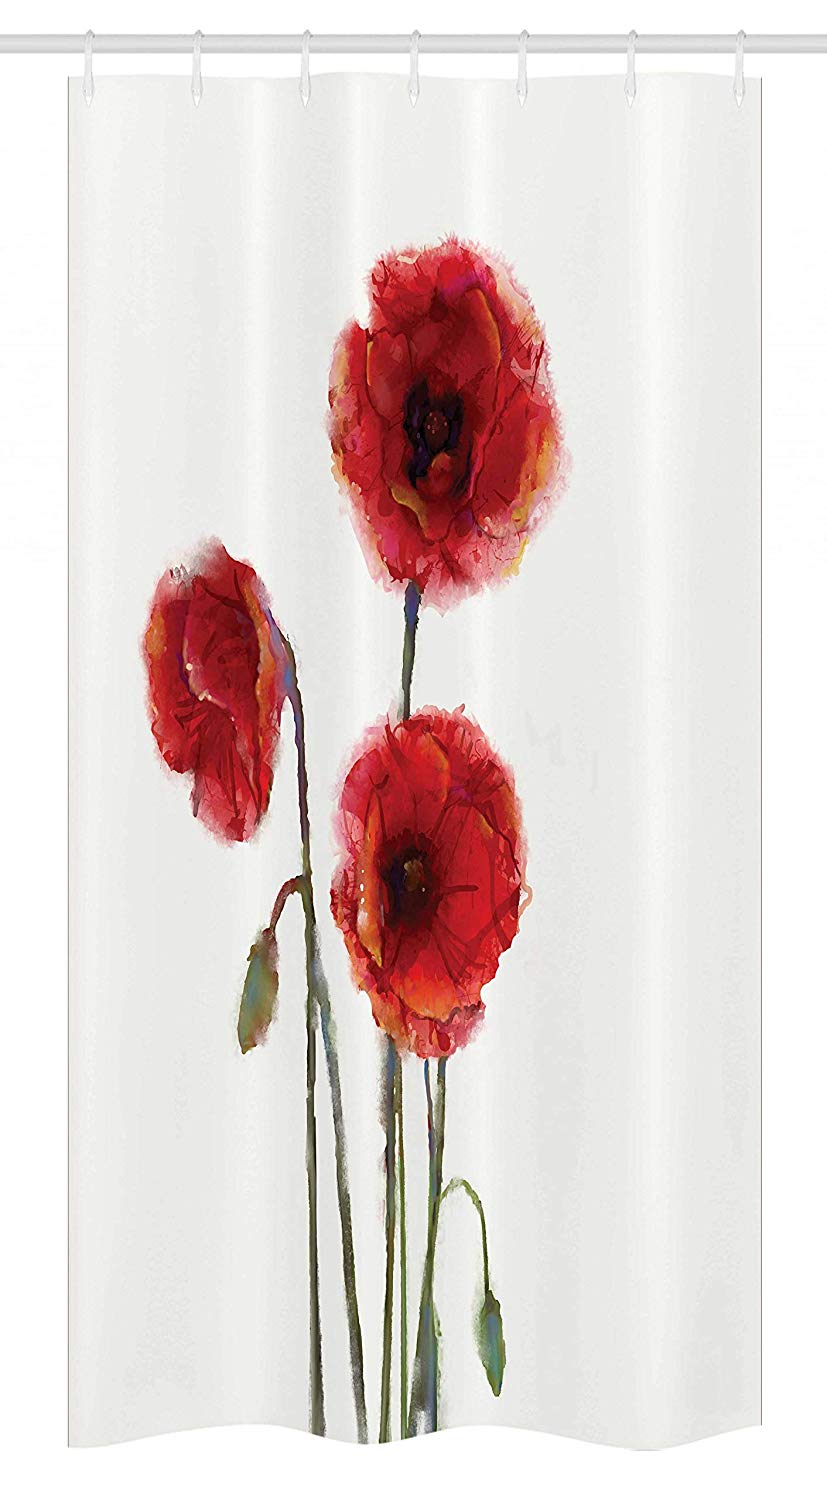 Ambesonne Watercolor Flower Stall Shower Curtain, Poppy Flowers Spring Blossoms with Watercolor Painting Effect, Fabric Bathroom Decor Set with Hooks, 36 W x 72 L Inches, White Red Sage Green